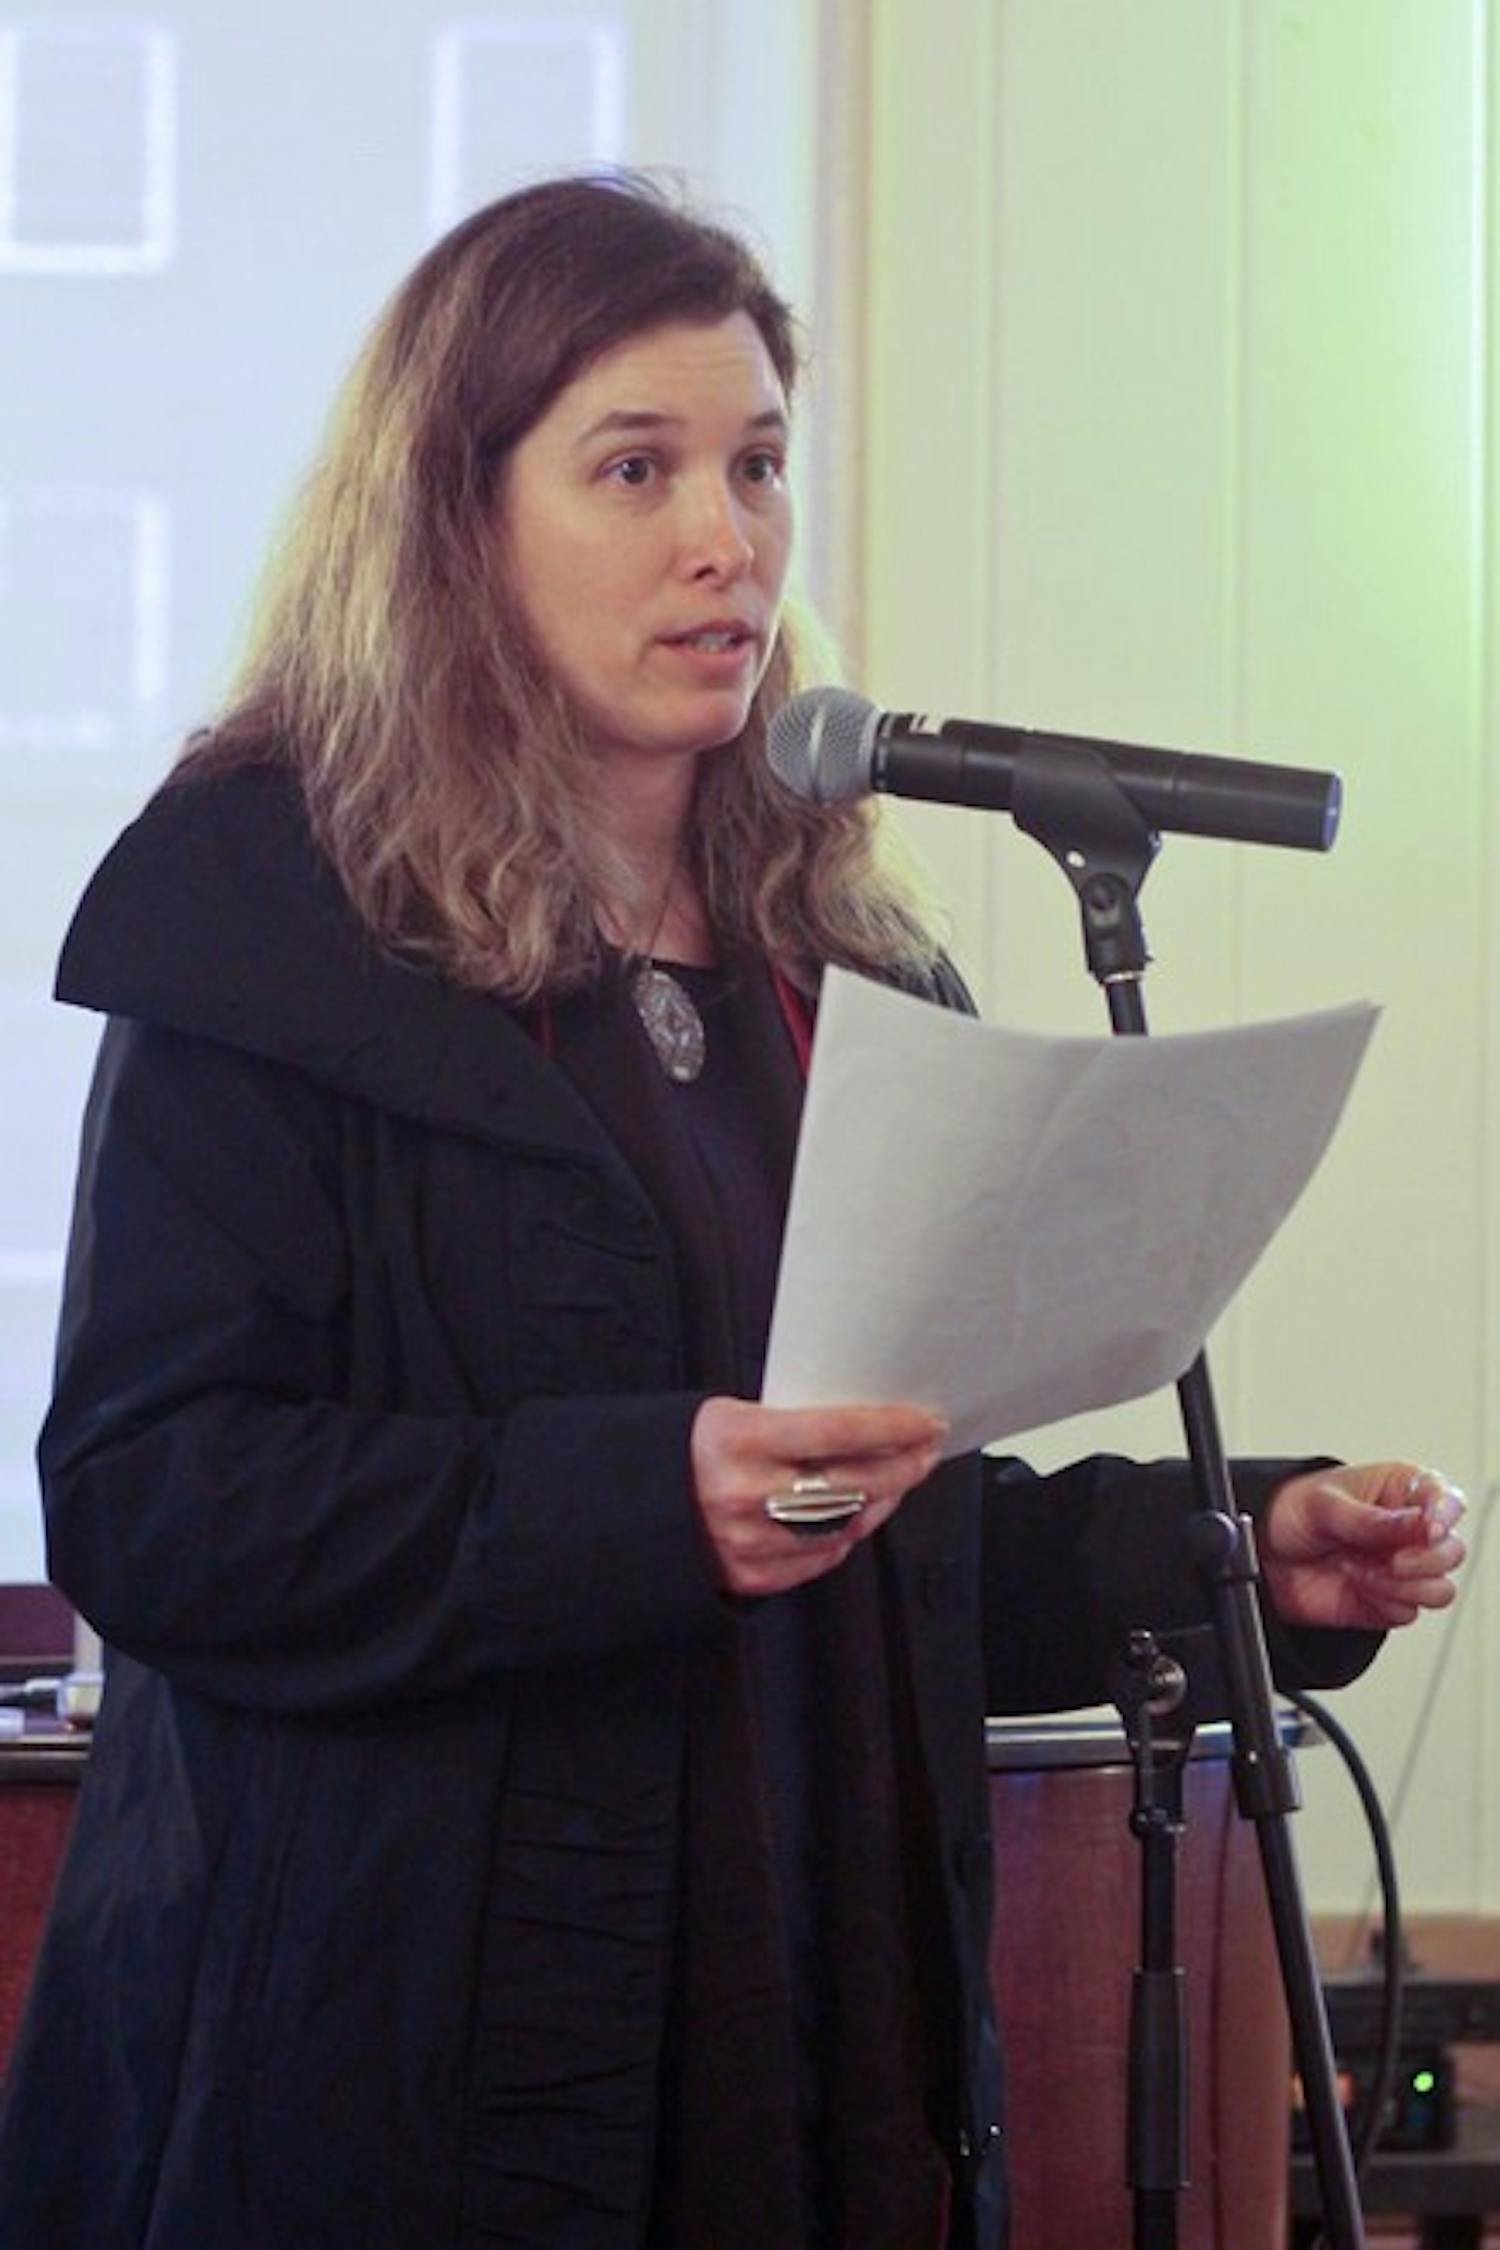 Filmmaker Liz Canner is the 2009 Visionary-in-Residence at the Center for Women and Gender at Dartmouth.